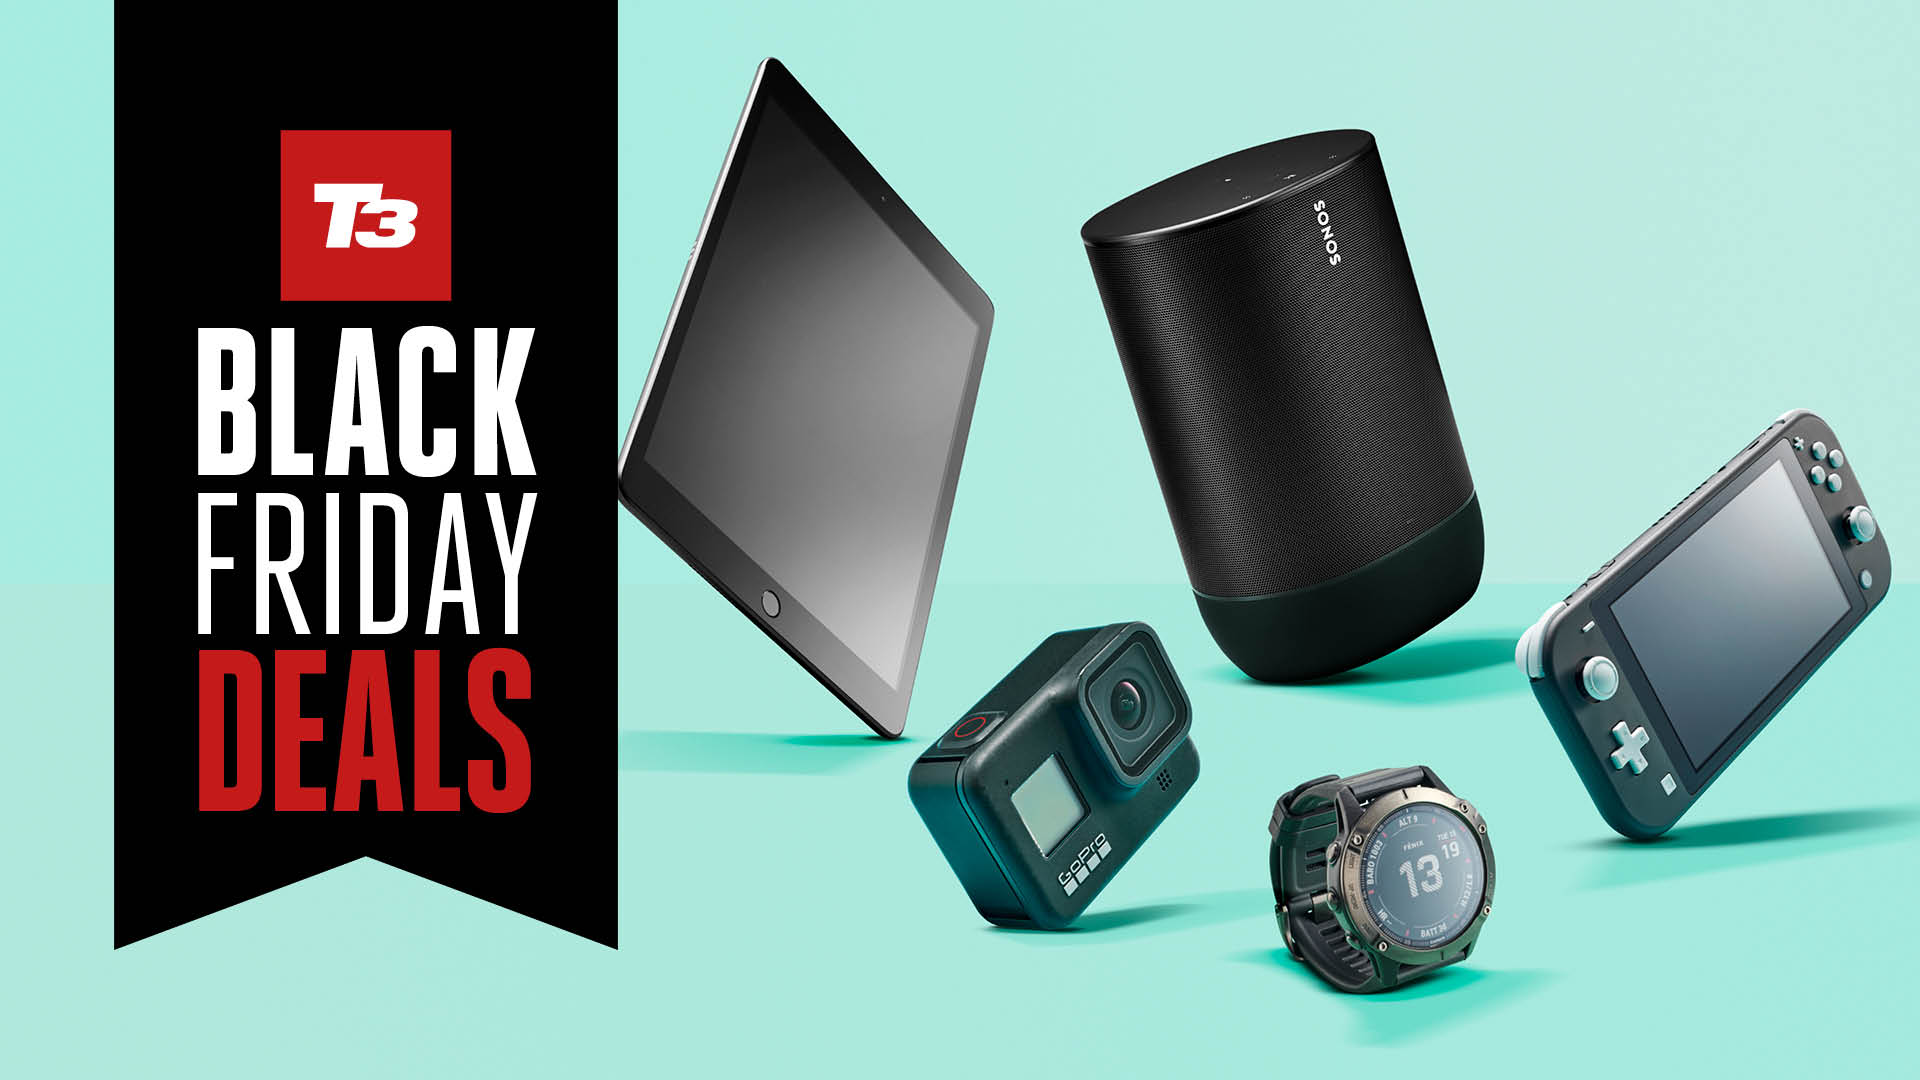 Best Black Friday Deals Uk Airpods Nintendo Switch Fitbit Samsung Lg Tv And More On Sale Now T3